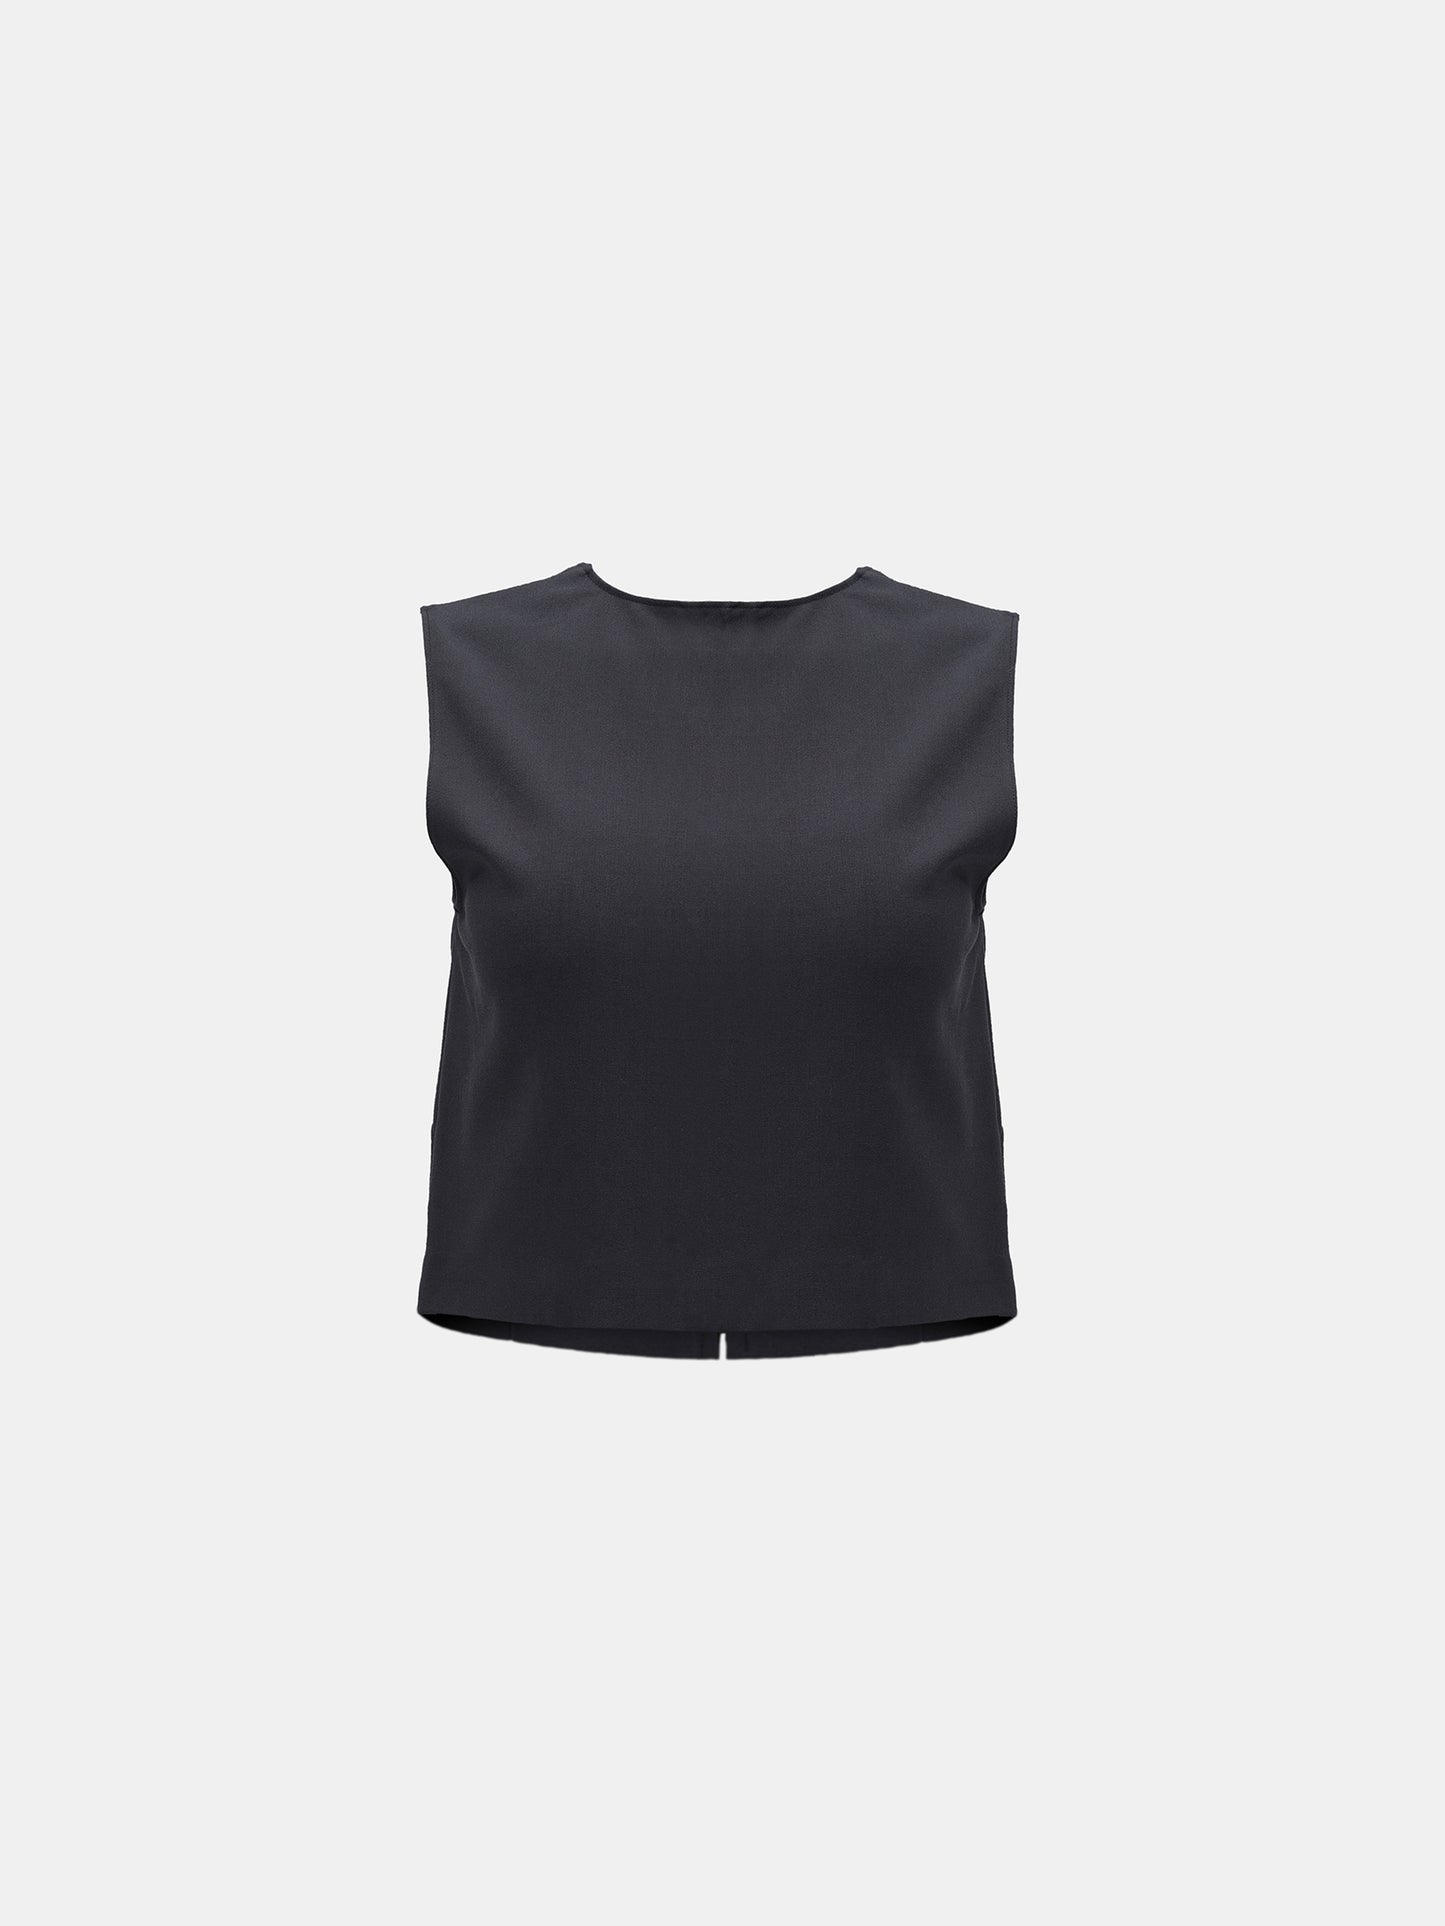 Sleeveless Suit Top, Charcoal